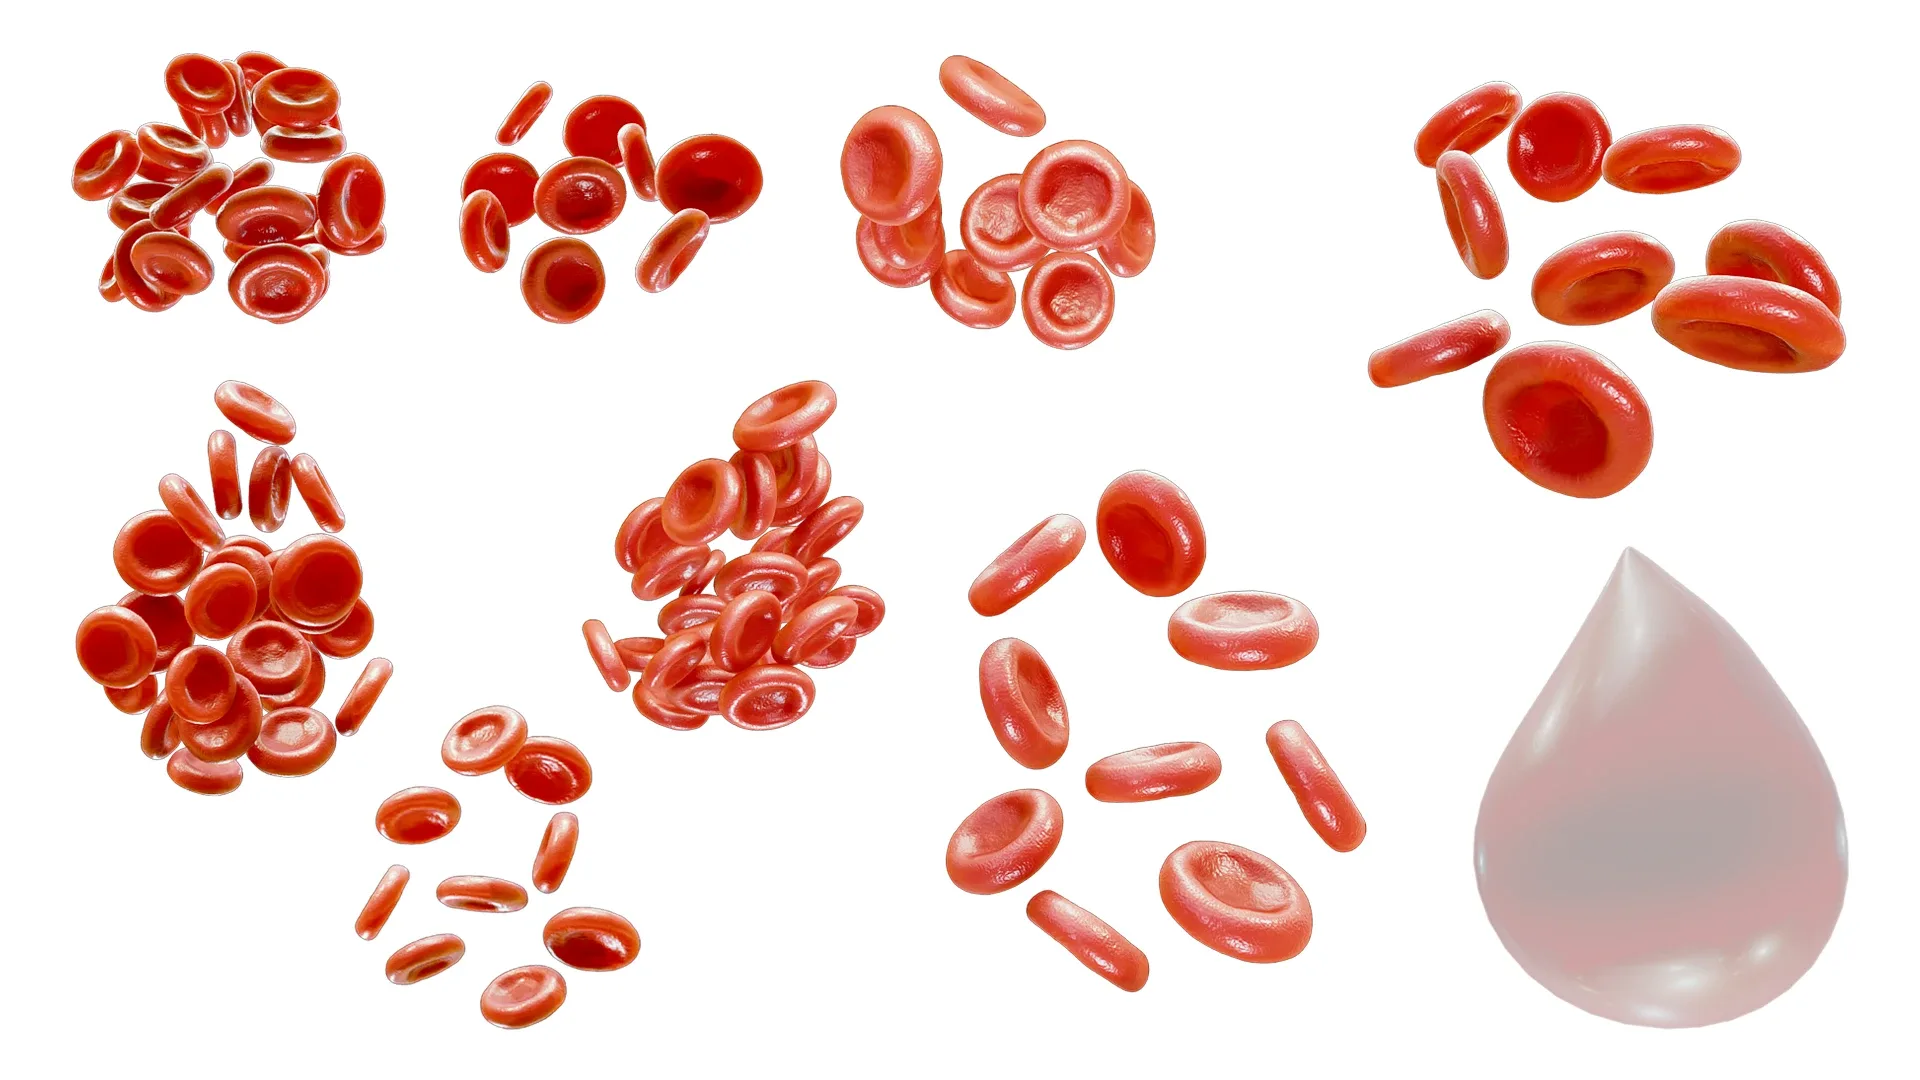 Normal Blood Cells vs Anemia